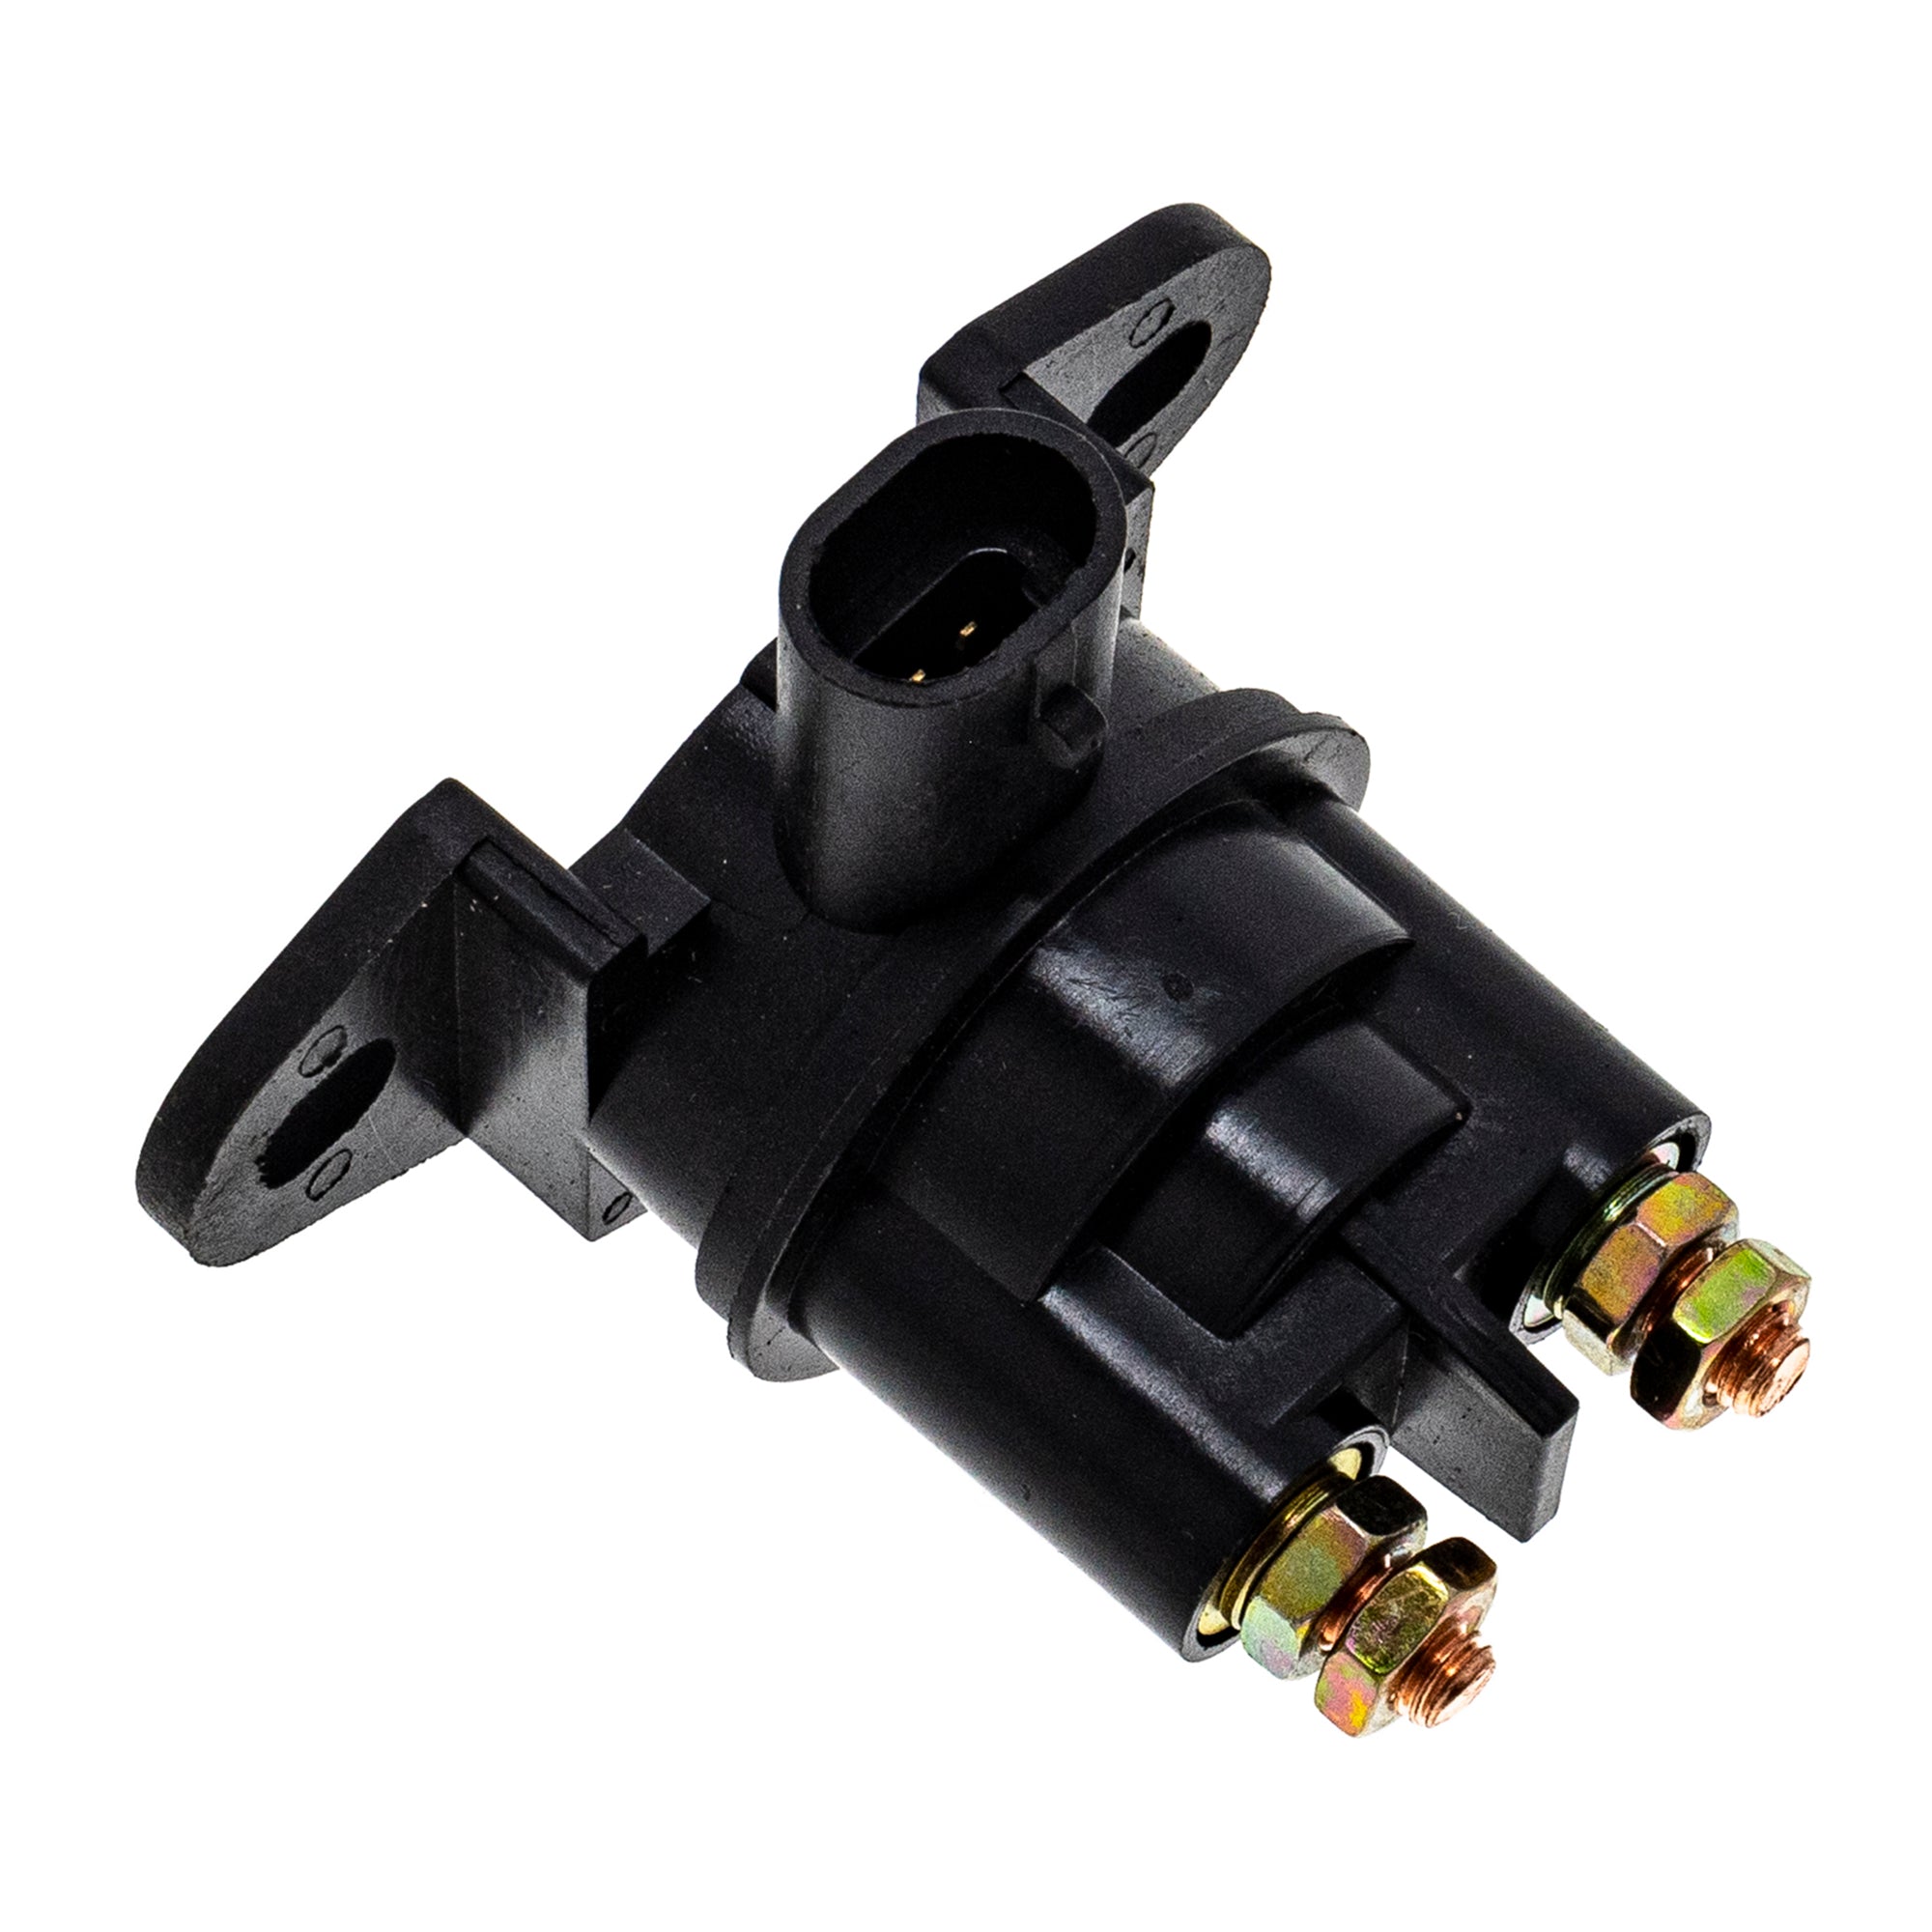 Starter Solenoid Relay Switch For Can-Am Ski-Doo Sea-Doo 278003012 278002347 278001802 278001766